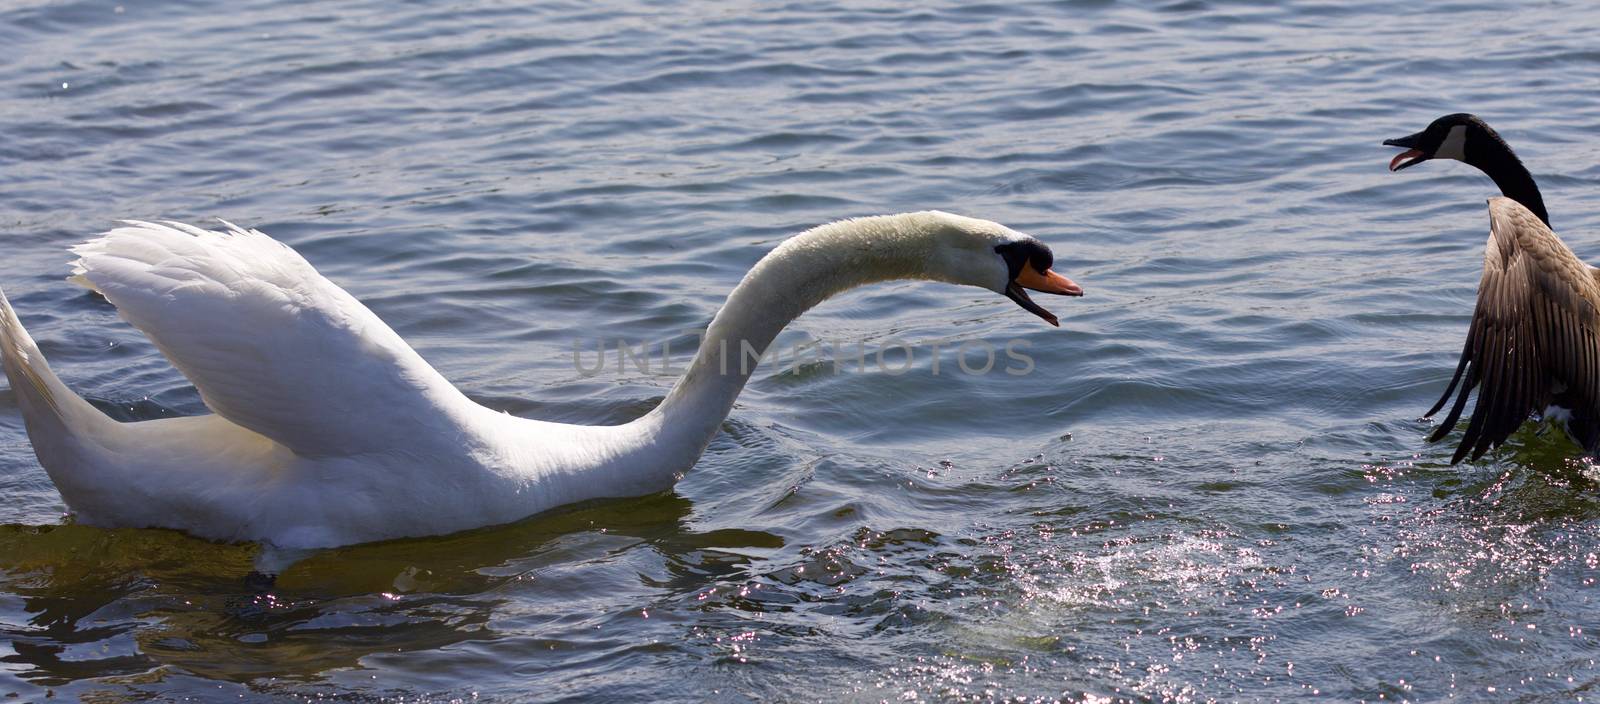 Amazing isolated photo of the swan attacking the Canada goose